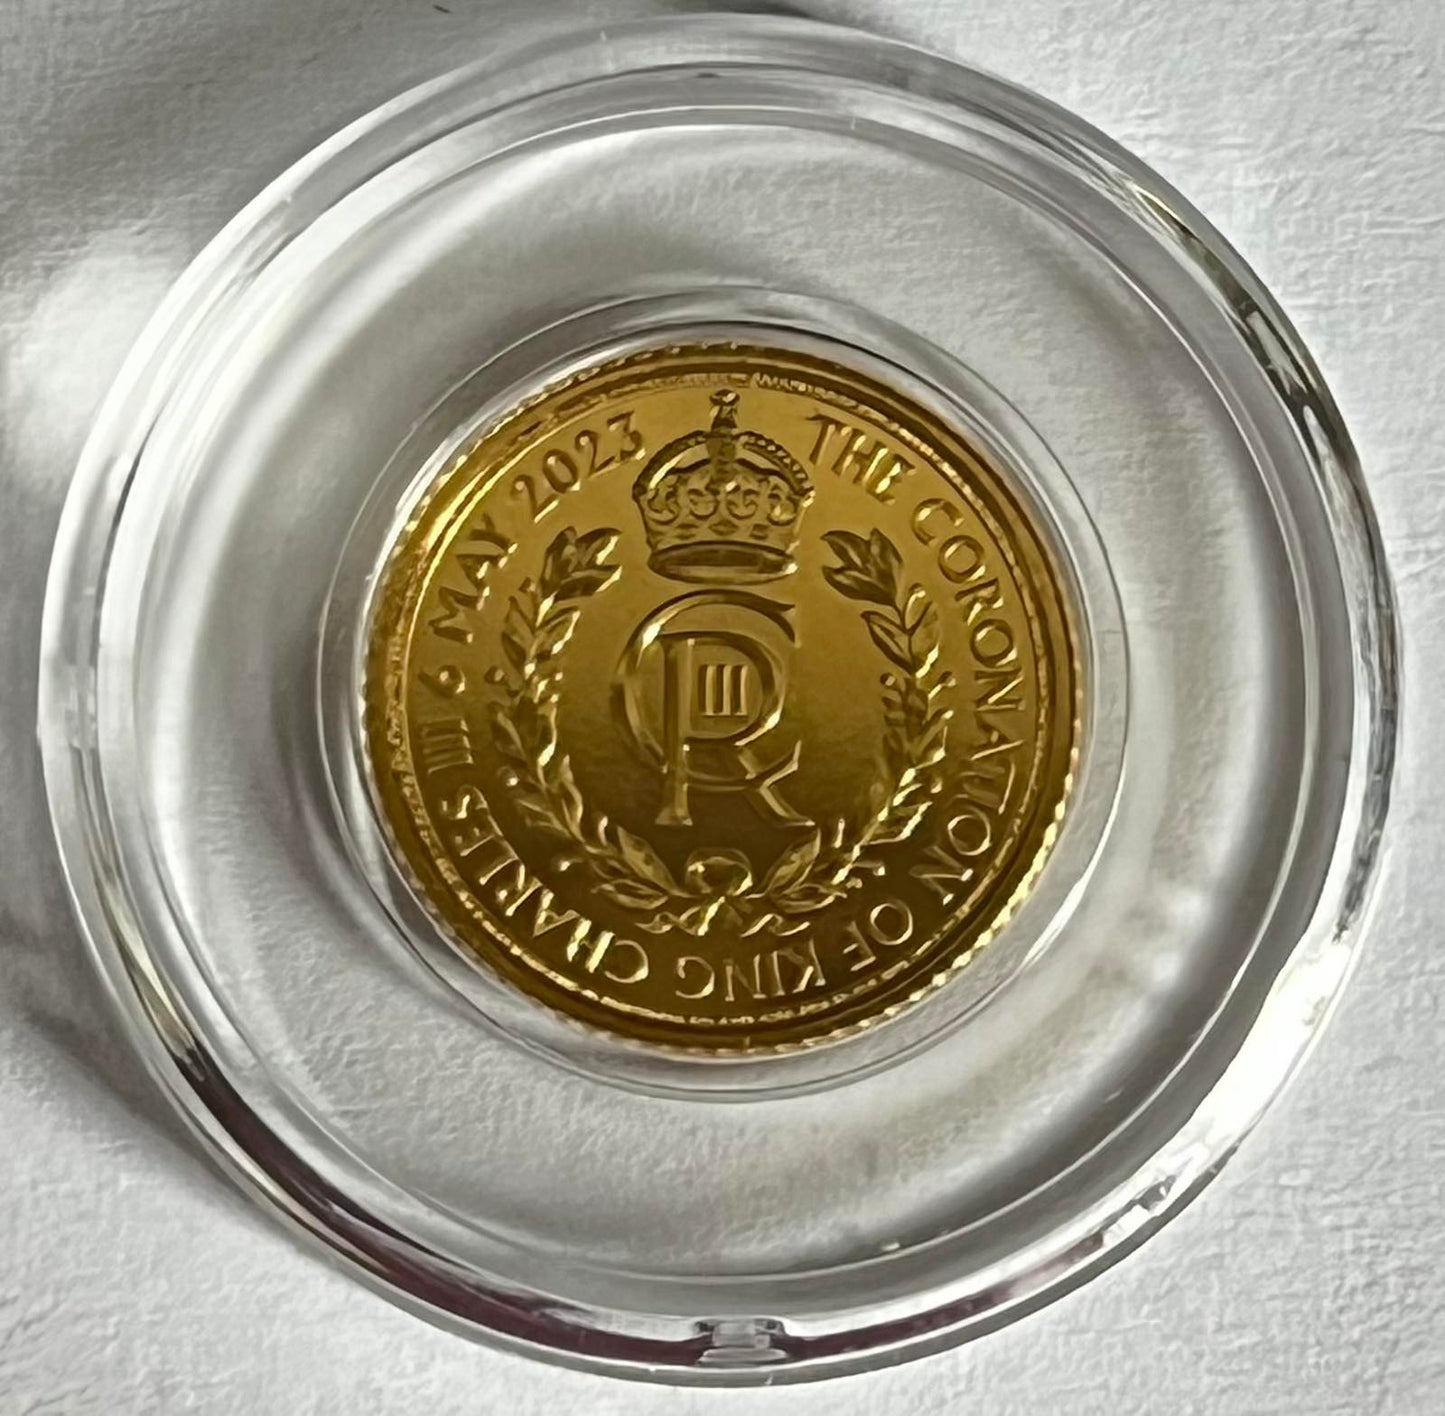 2023 Great Britain The Coronation of His Majesty King Charles III 1/10 oz Gold Coin BU in Capsule